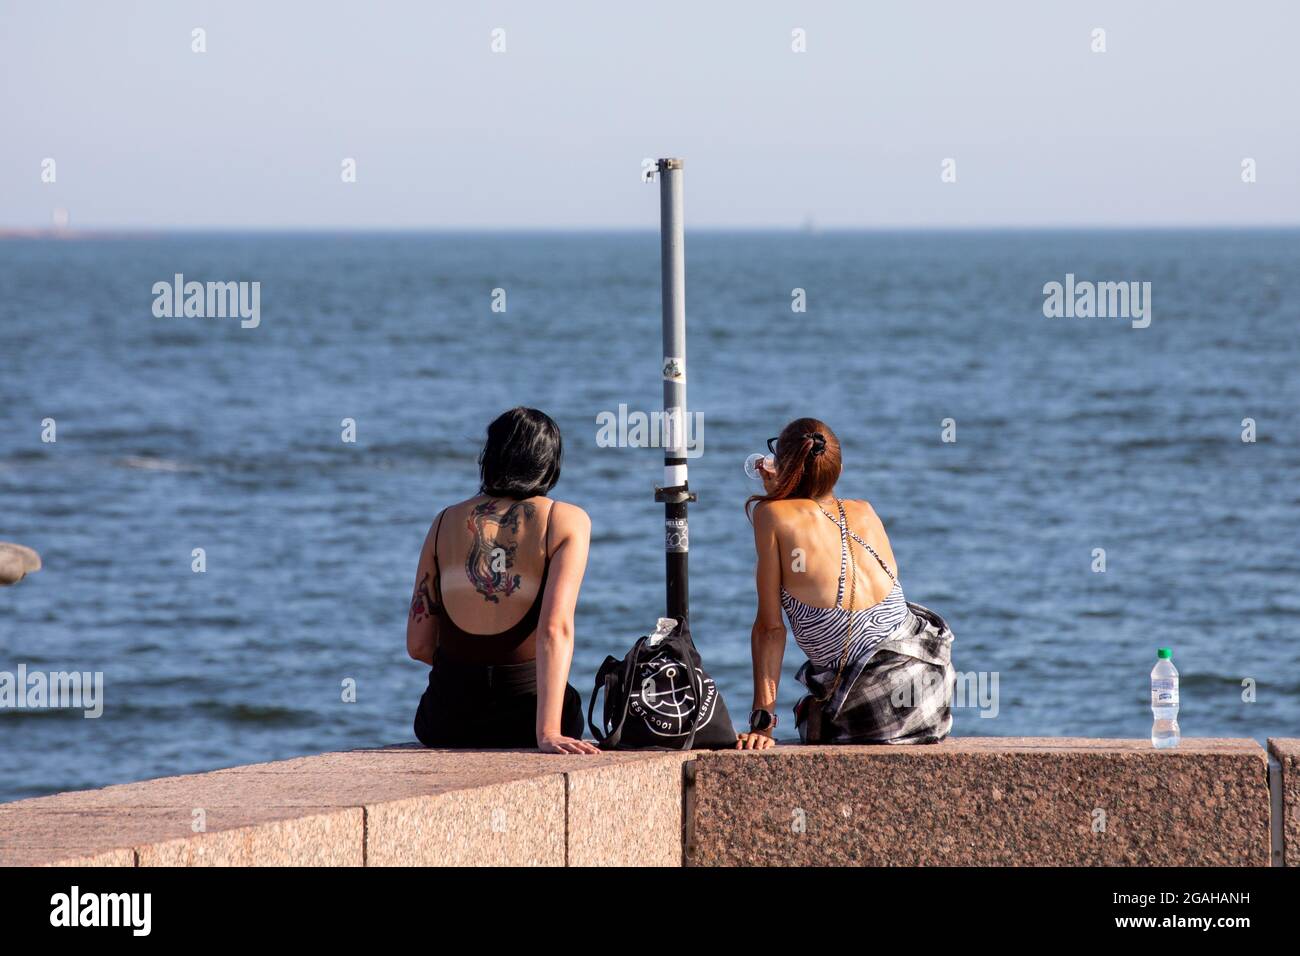 Two women sitting on the dock on a warm summer evening in Eira district of Helsinki, Finland Stock Photo